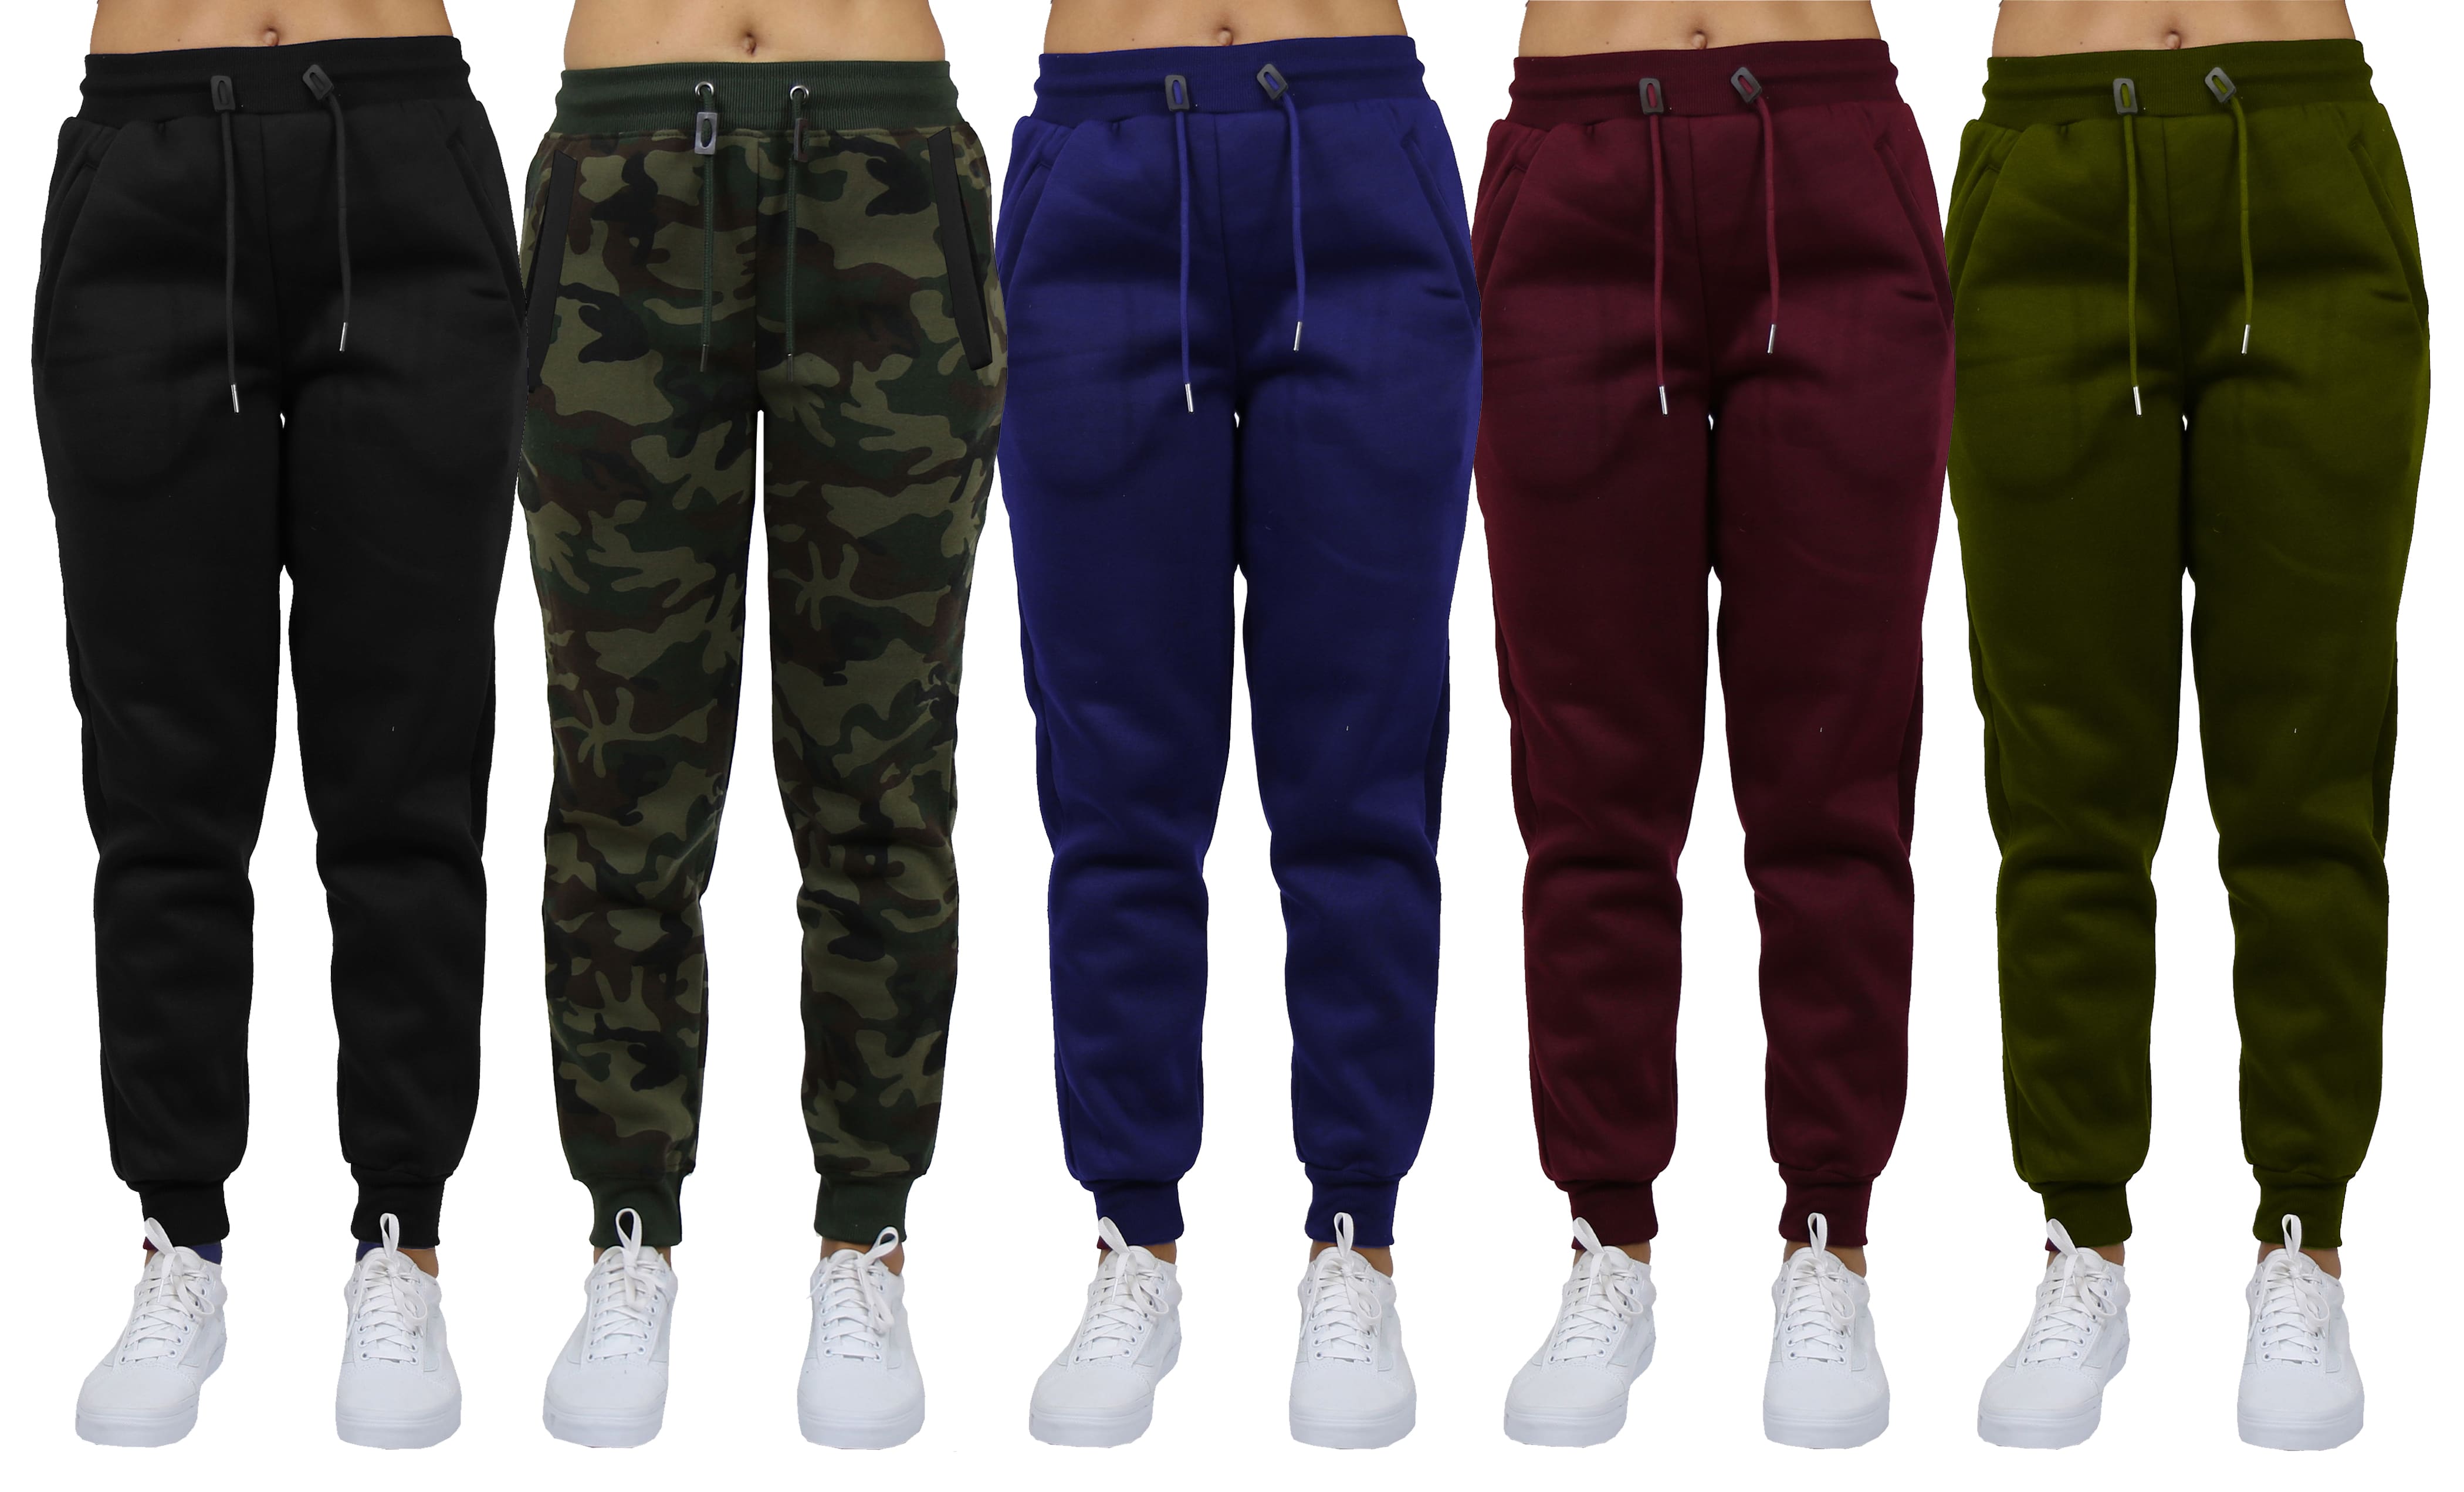 Galaxy by Harvic 3-Pack Women's Loose Fit Fleece Jogger Sweatpants